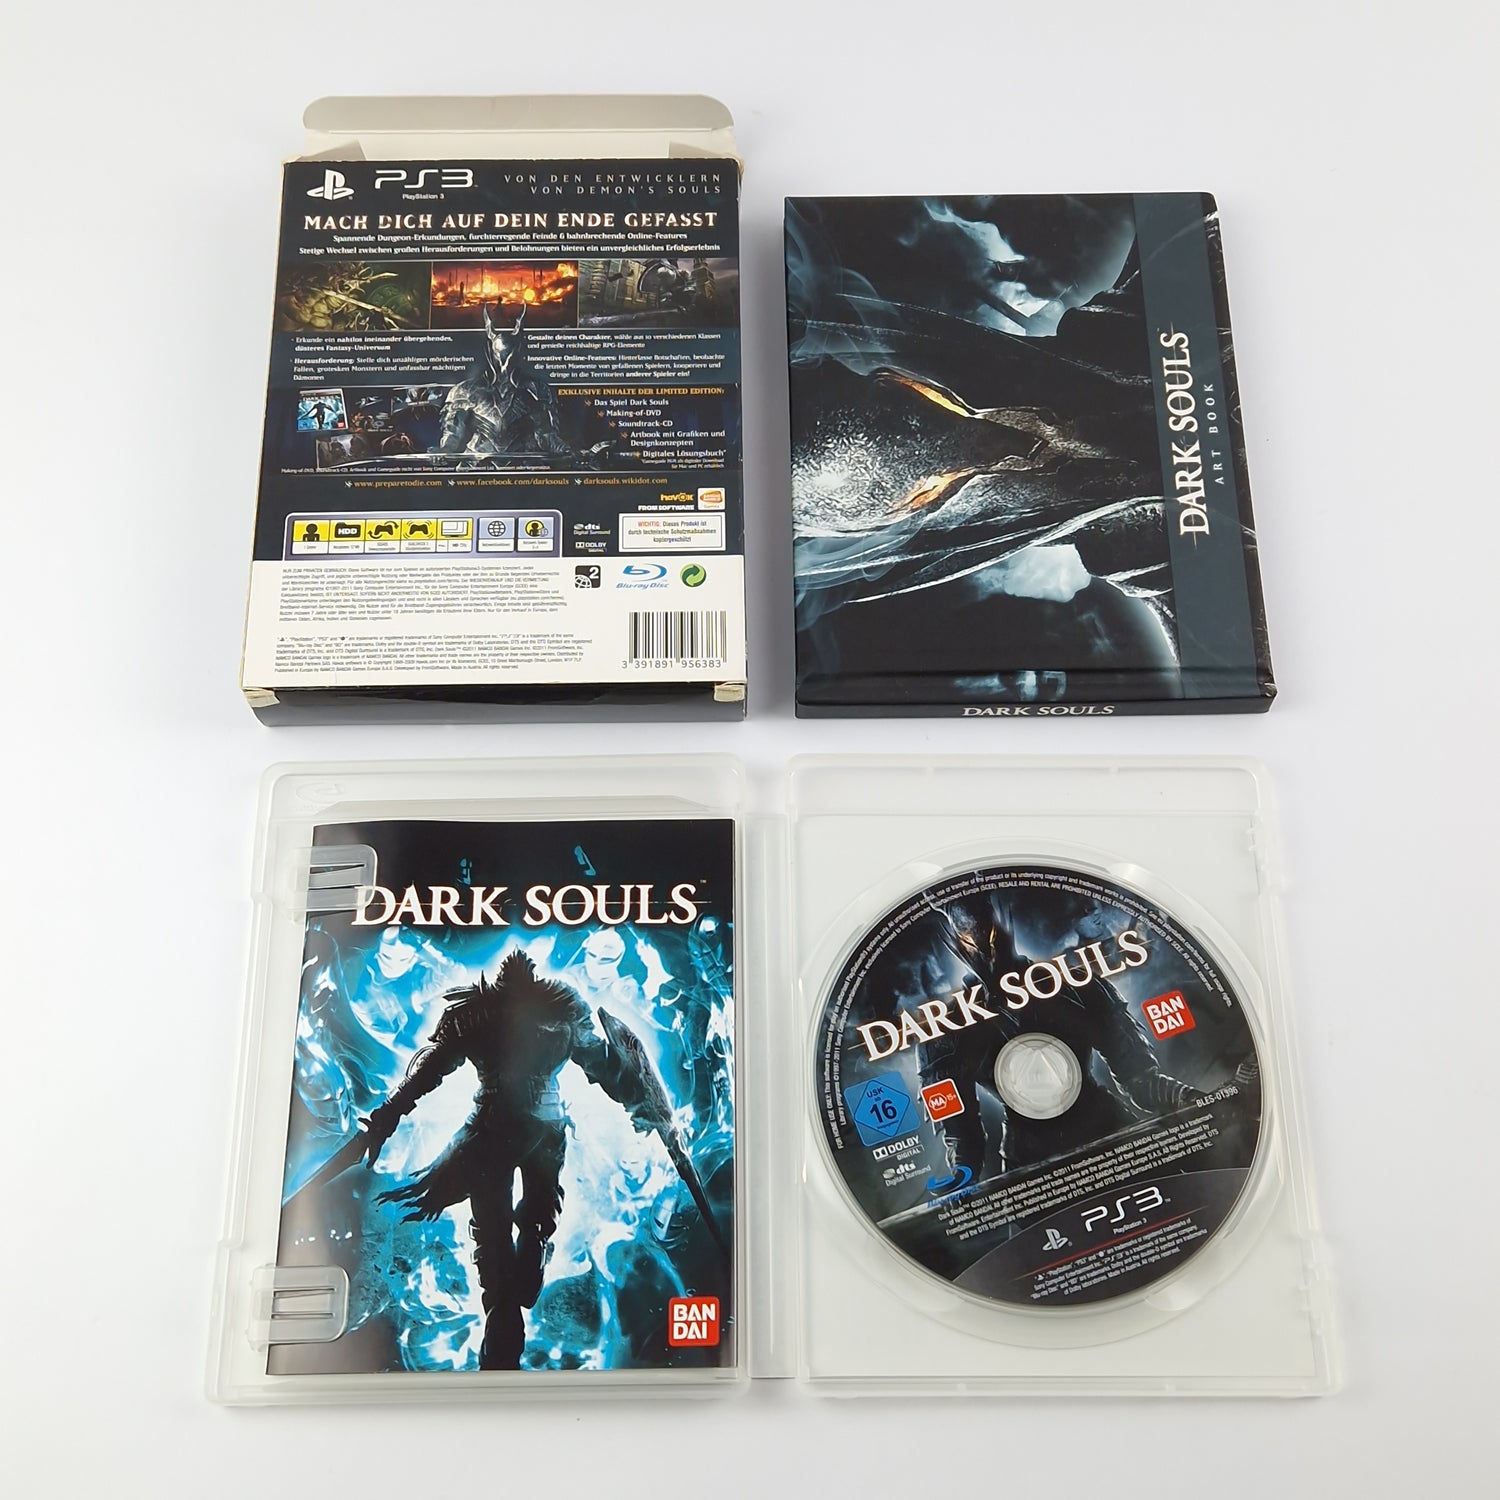 Sony Playstation 3 Game: Dark Souls Limited Edition - OVP Instructions PAL | PS3